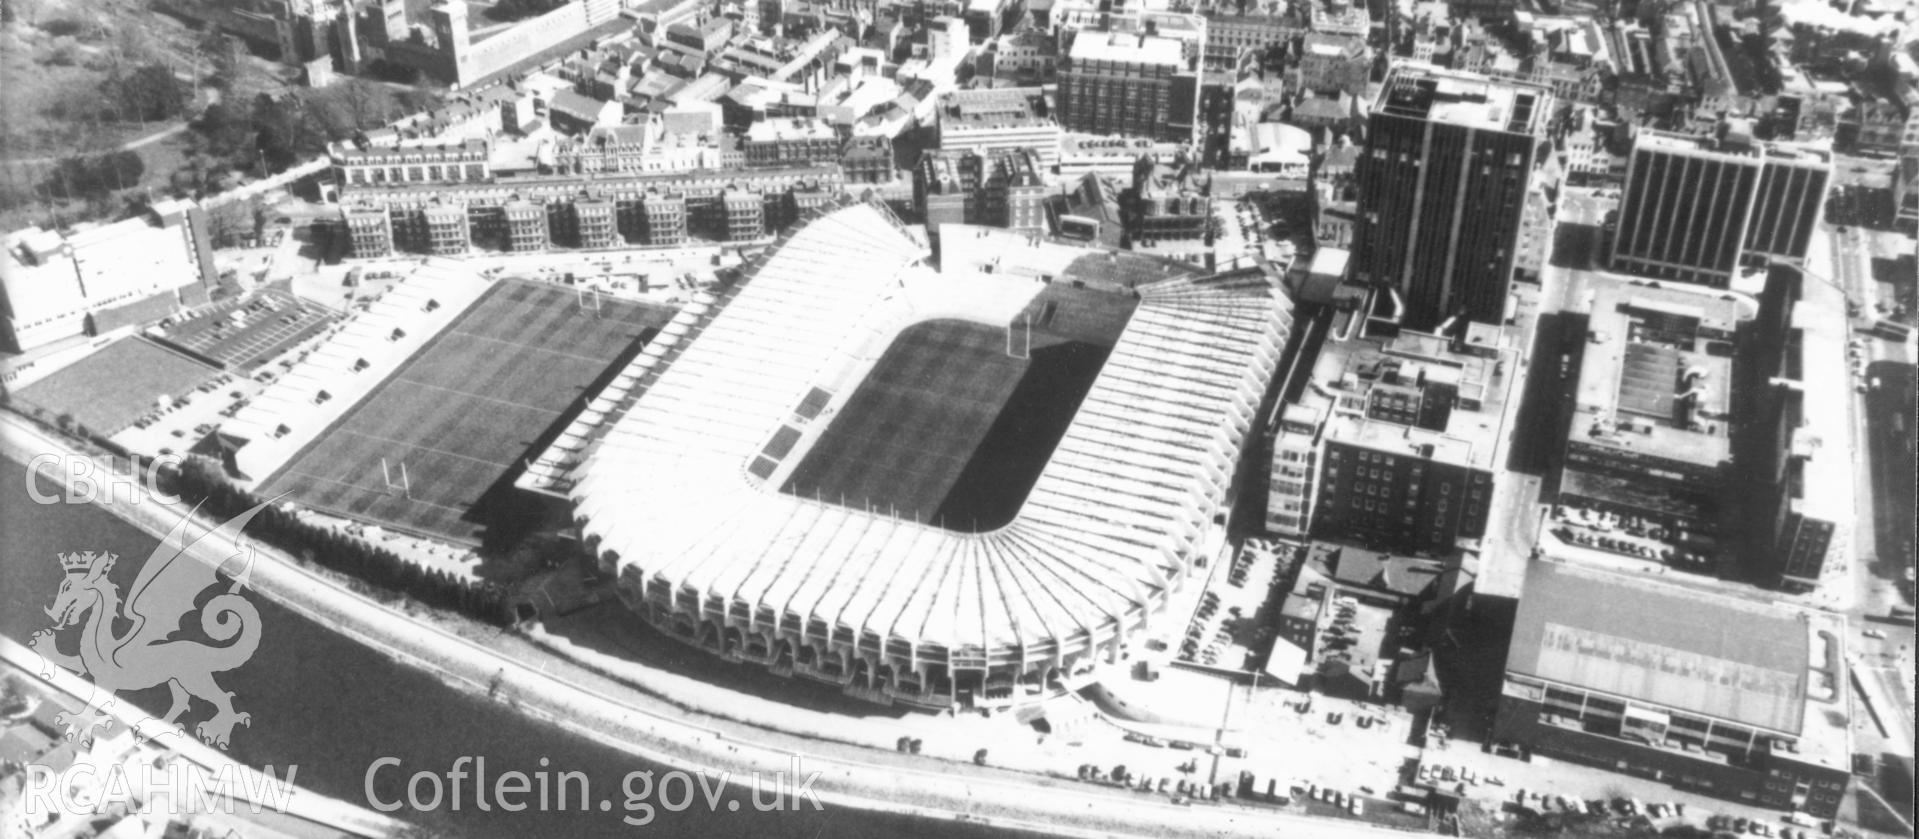 1 b/w print showing aerial oblique view of Cardiff Arms Park, Cardiff; collated by the former Central Office of Information.